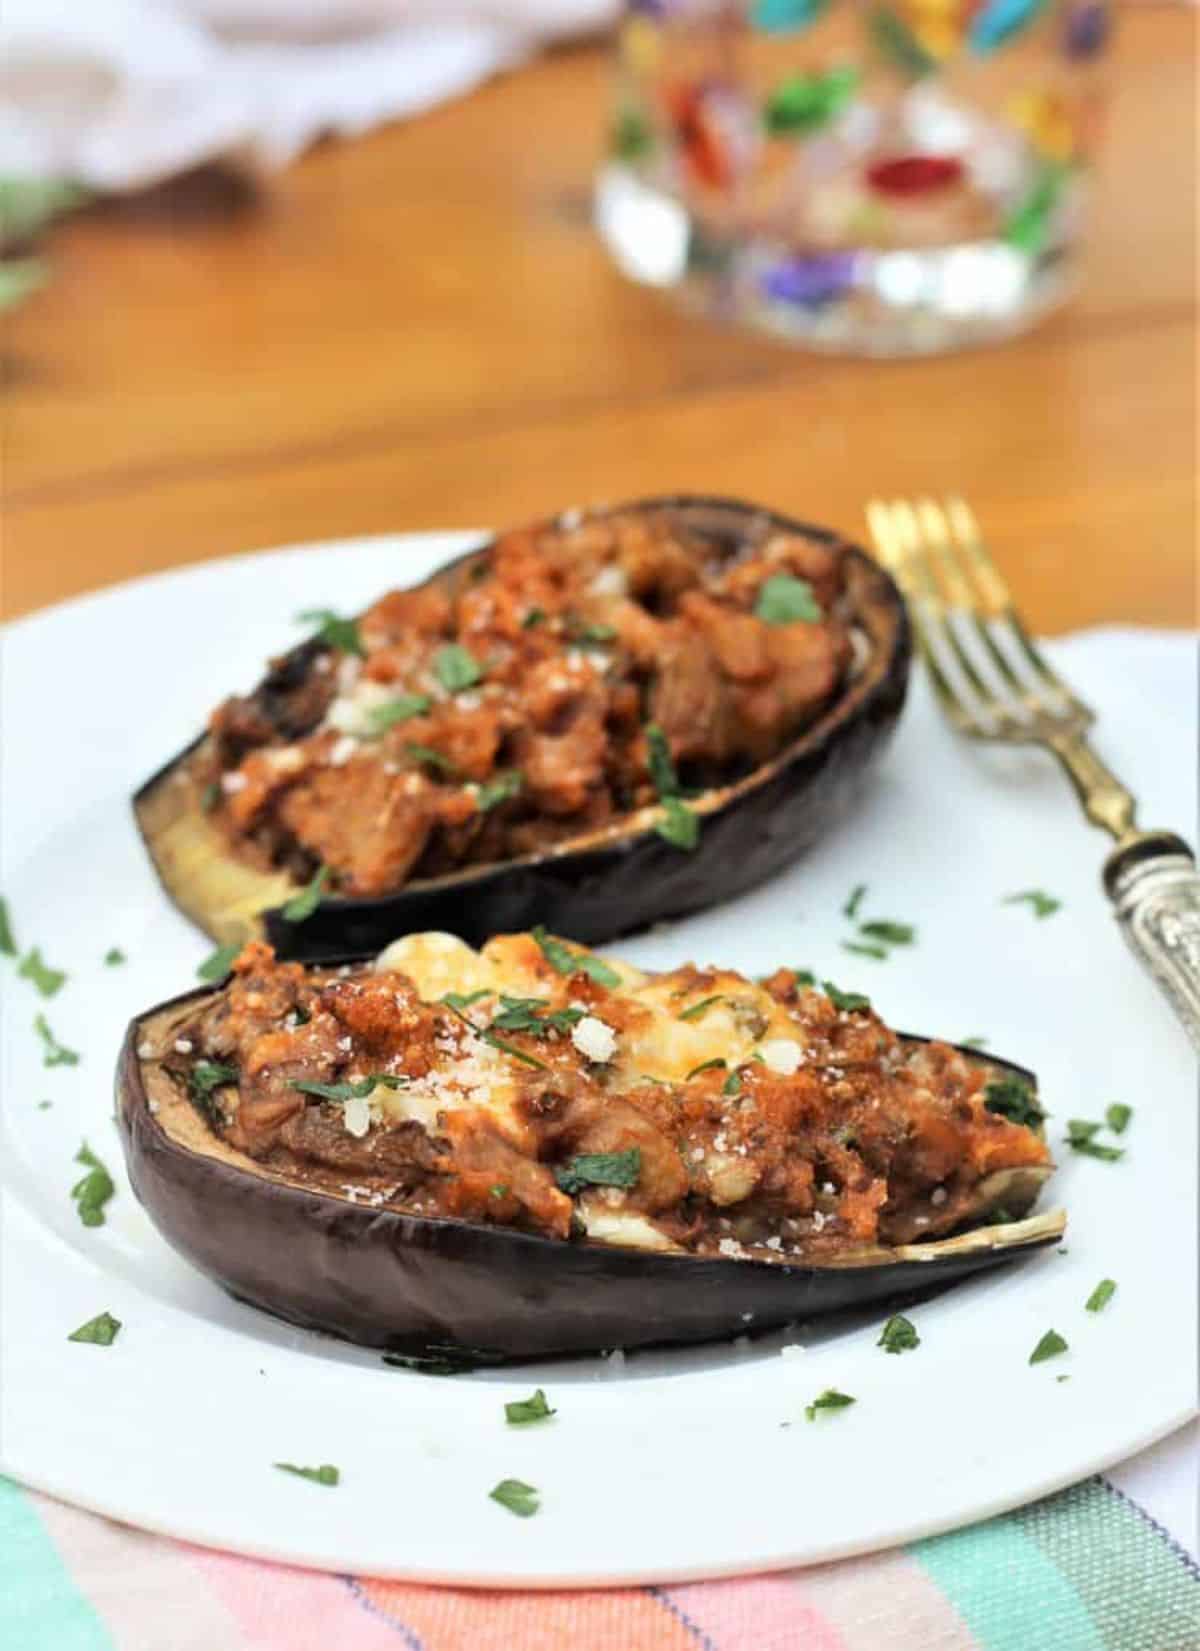 Mouth-watering stuffed baby eggplant on a white plate with a fork.